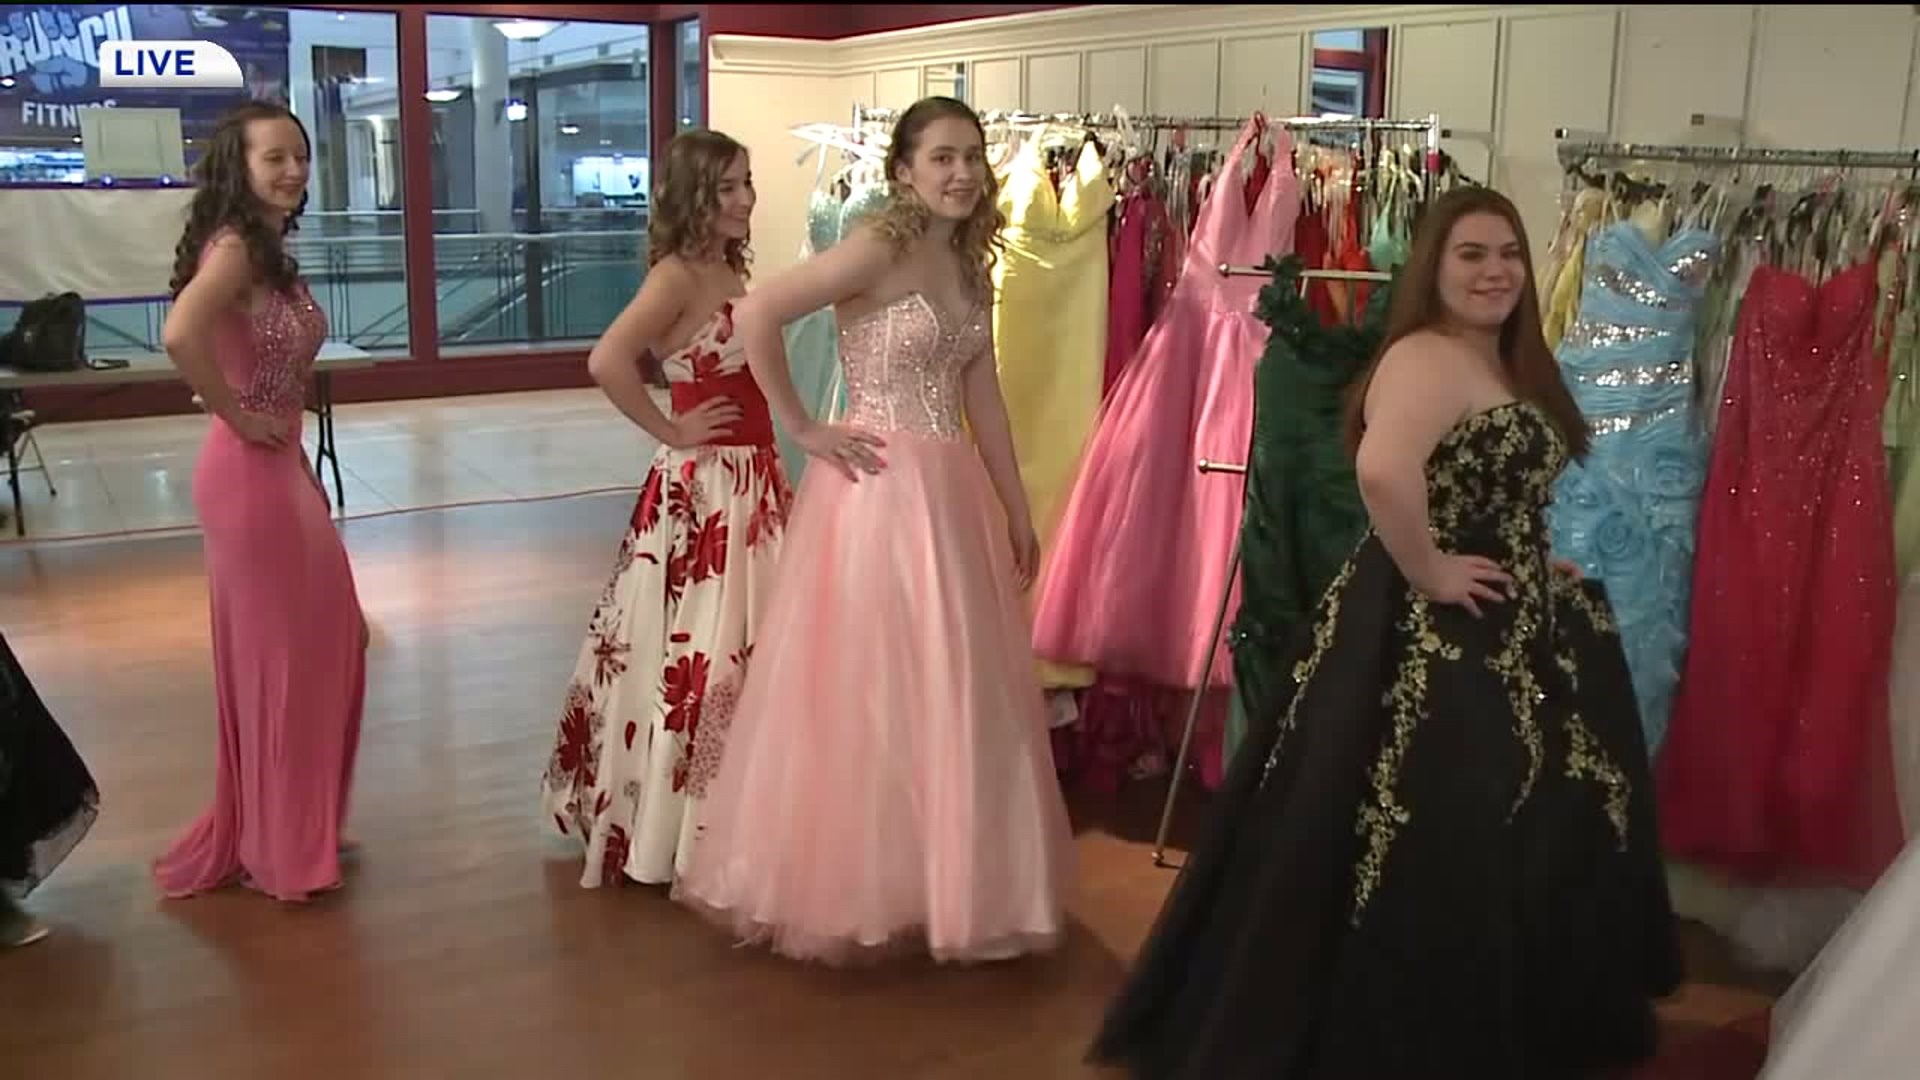 Avoiding a Pricey Prom: Event Helps Students and Parents Save Big Bucks